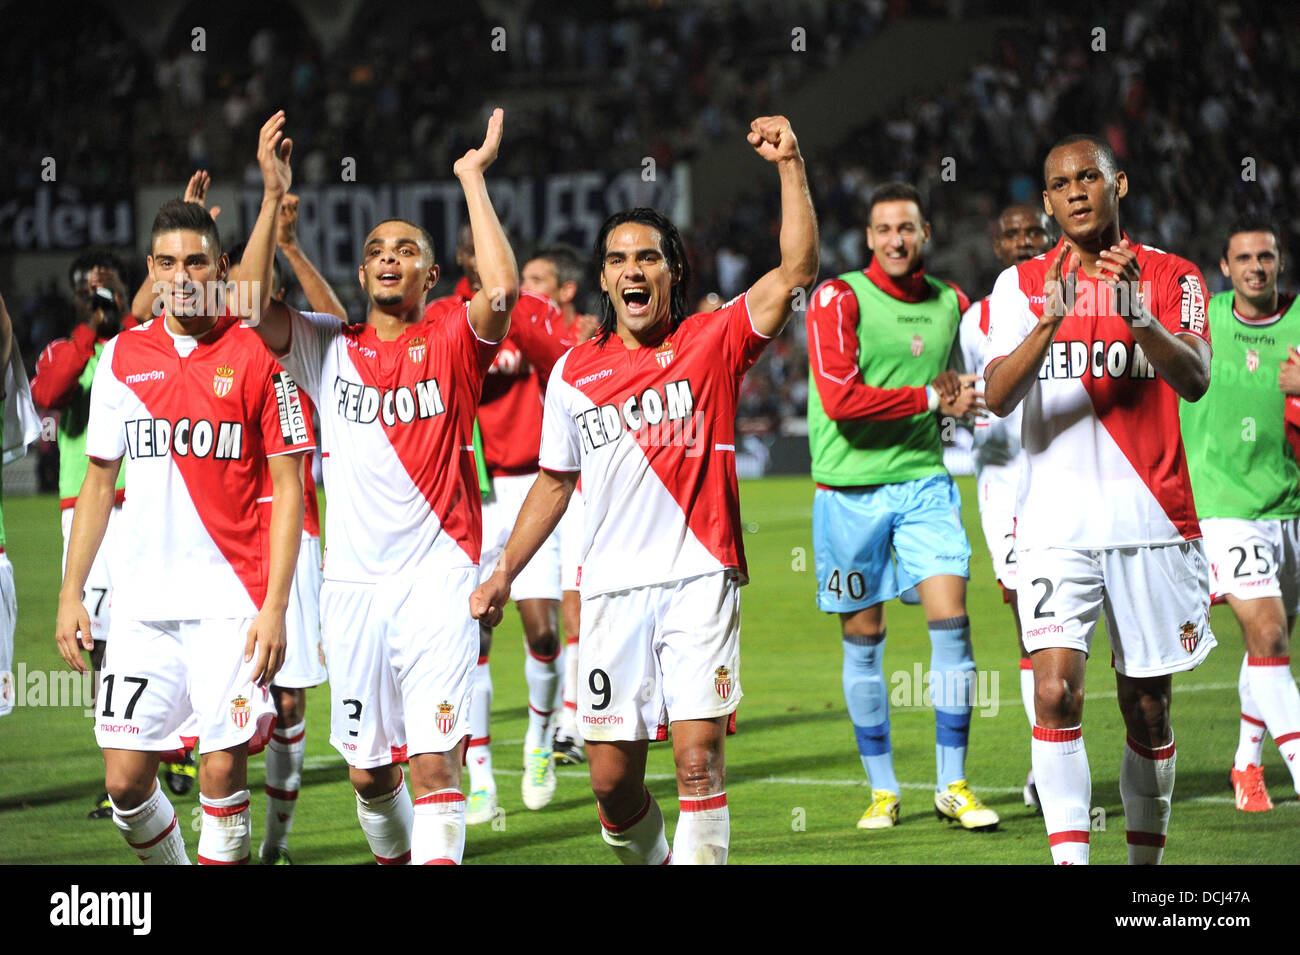 18.08.2013 Monaco. Monaco players celebrate after the French Ligue 1 game between Monaco and Montpellier from the Stade Louis II stadium. Stock Photo